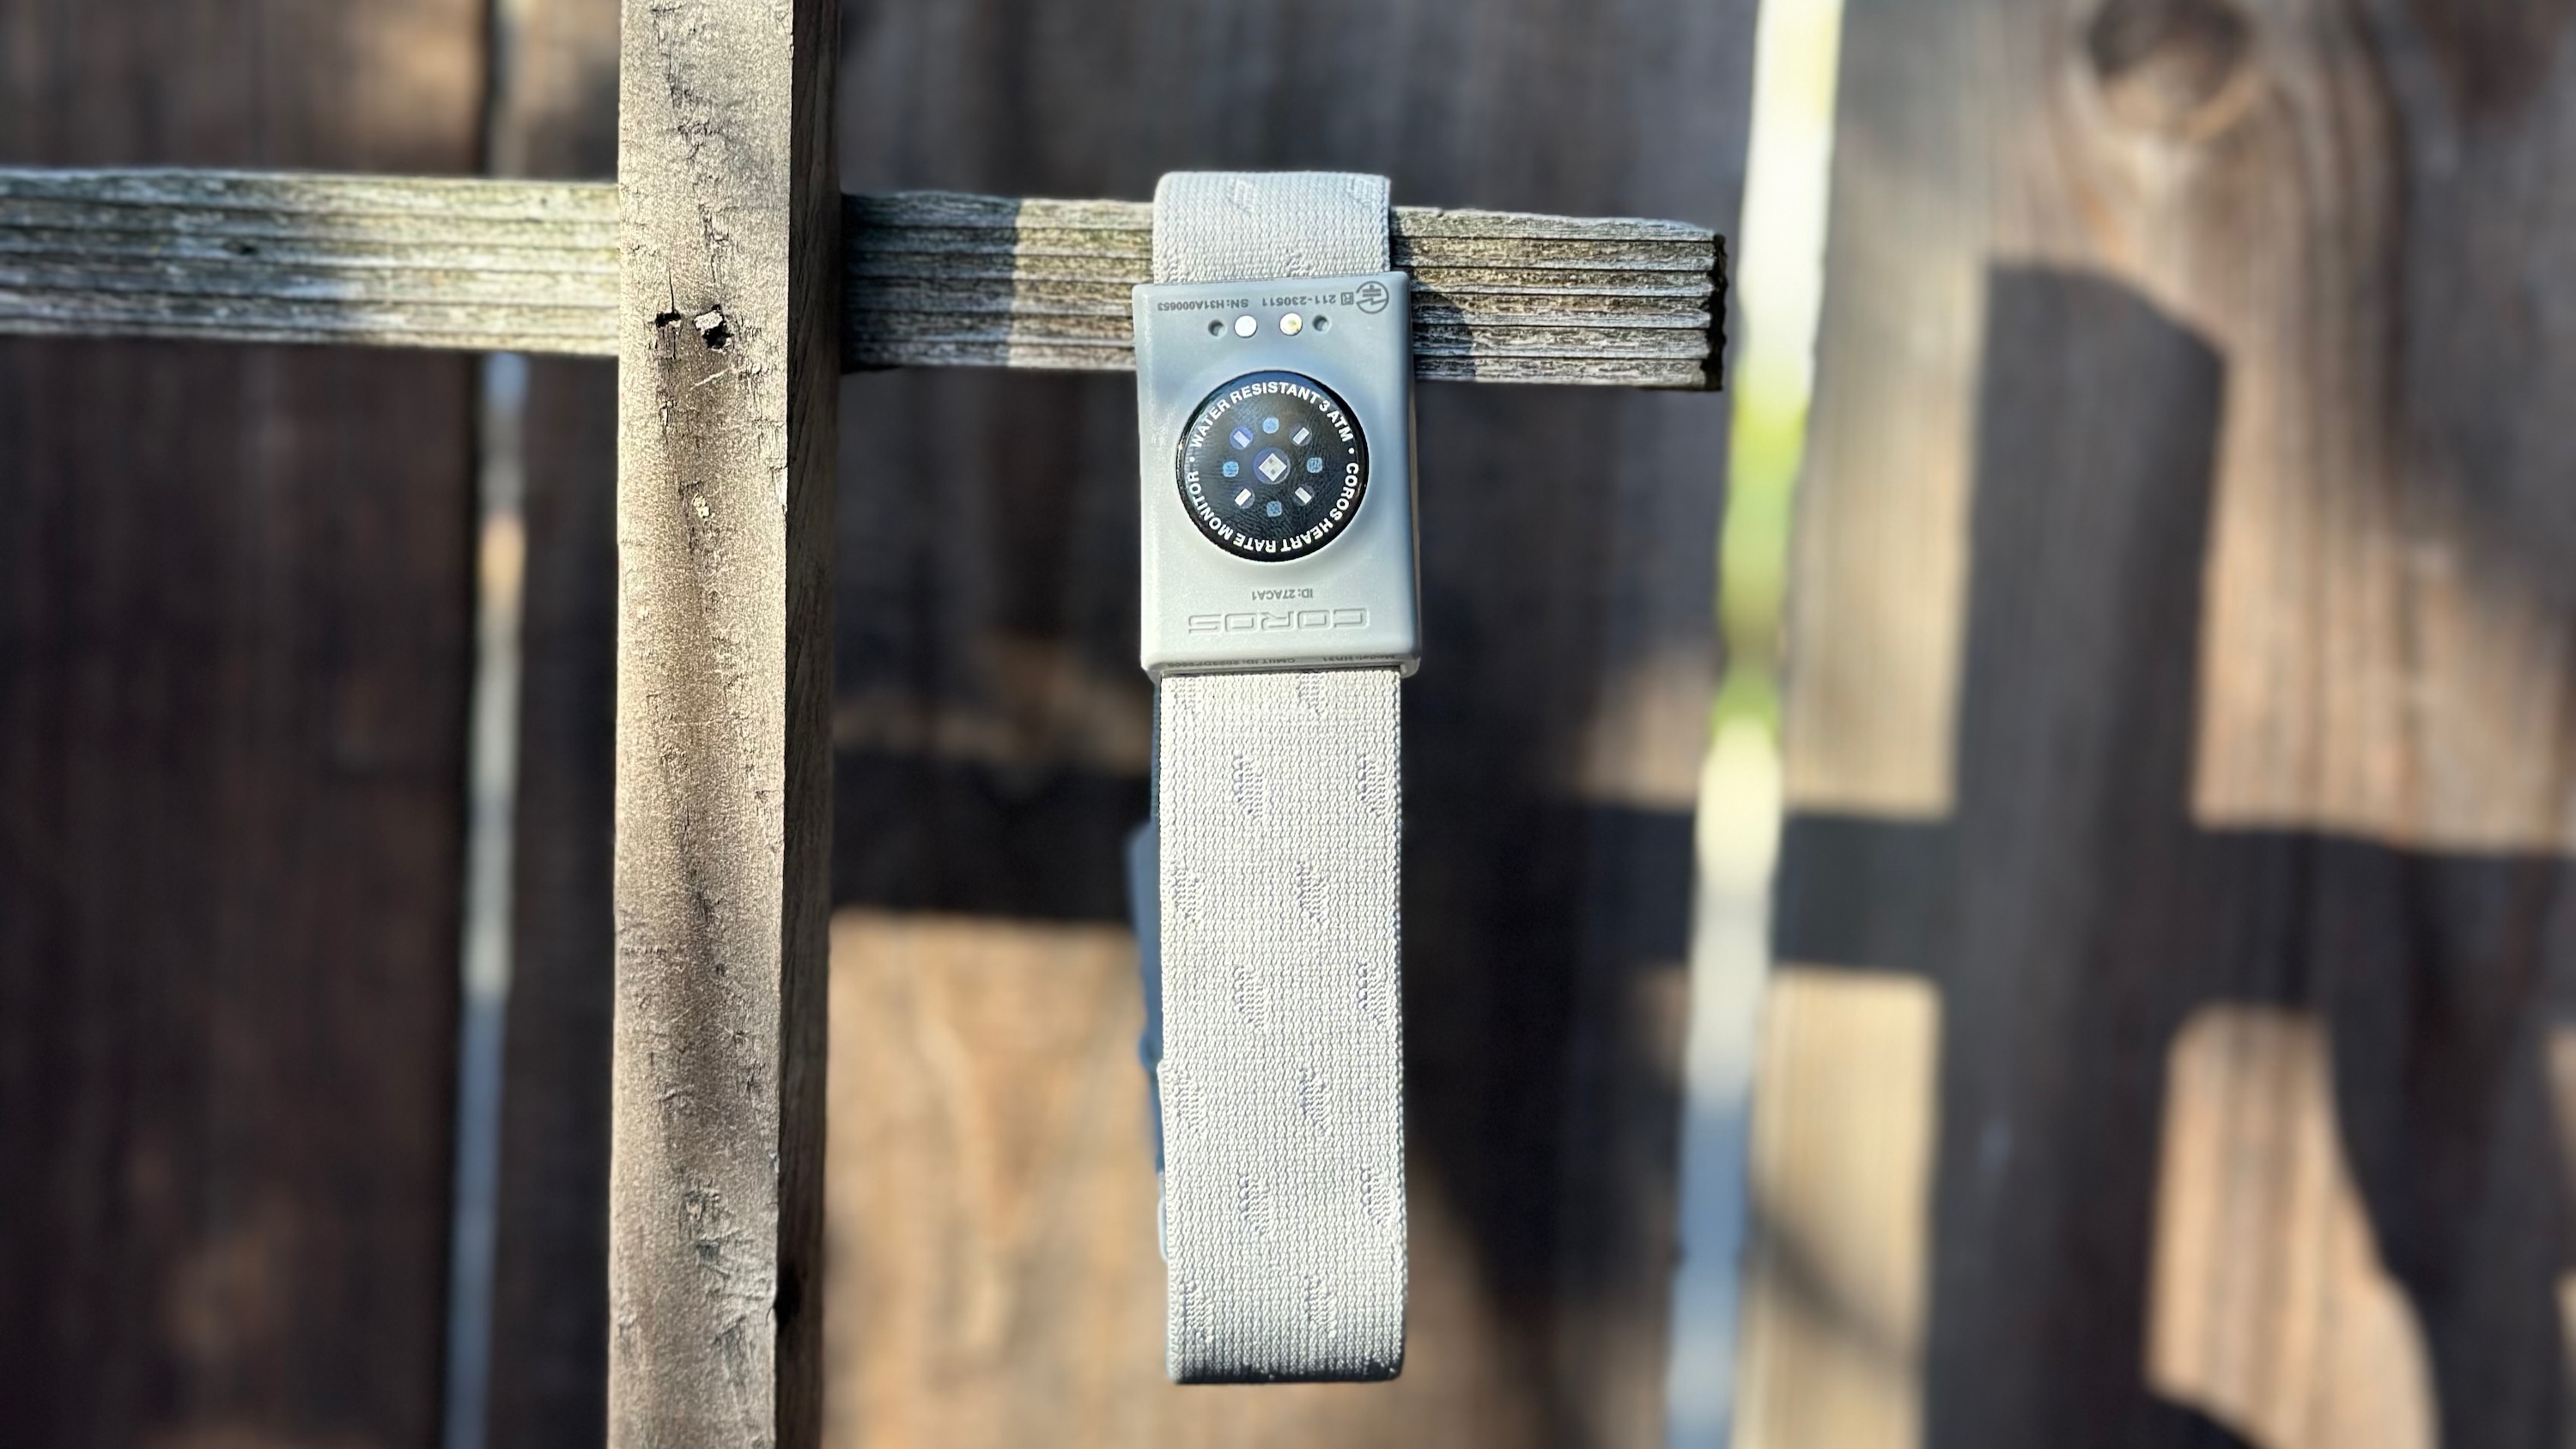 The COROS Heart Rate Monitor hanging off of a fence.